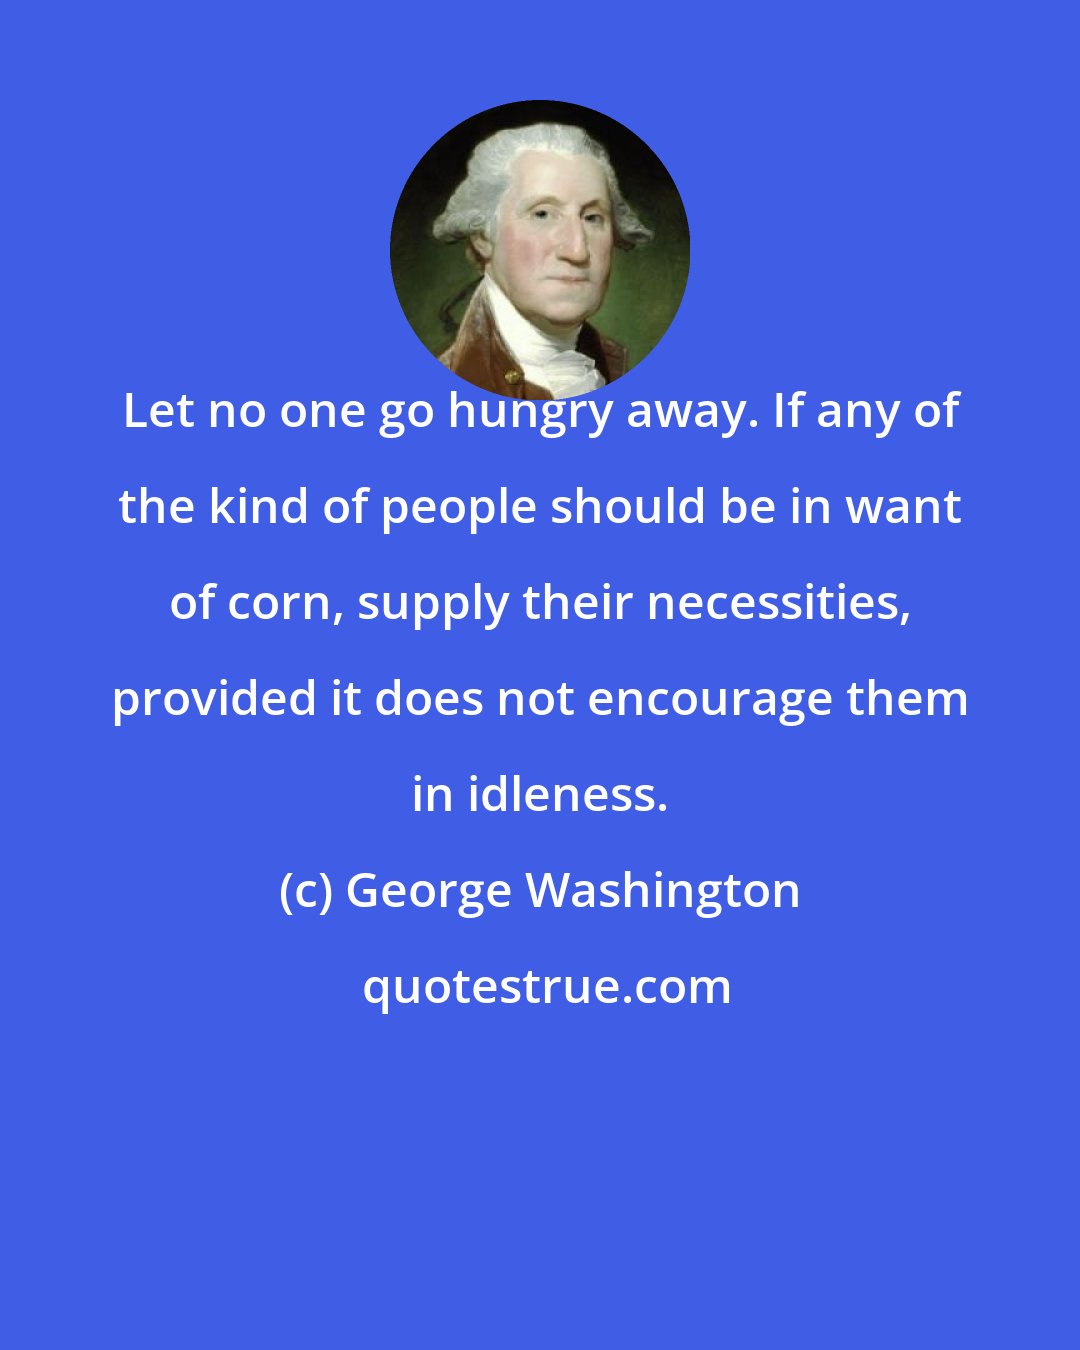 George Washington: Let no one go hungry away. If any of the kind of people should be in want of corn, supply their necessities, provided it does not encourage them in idleness.